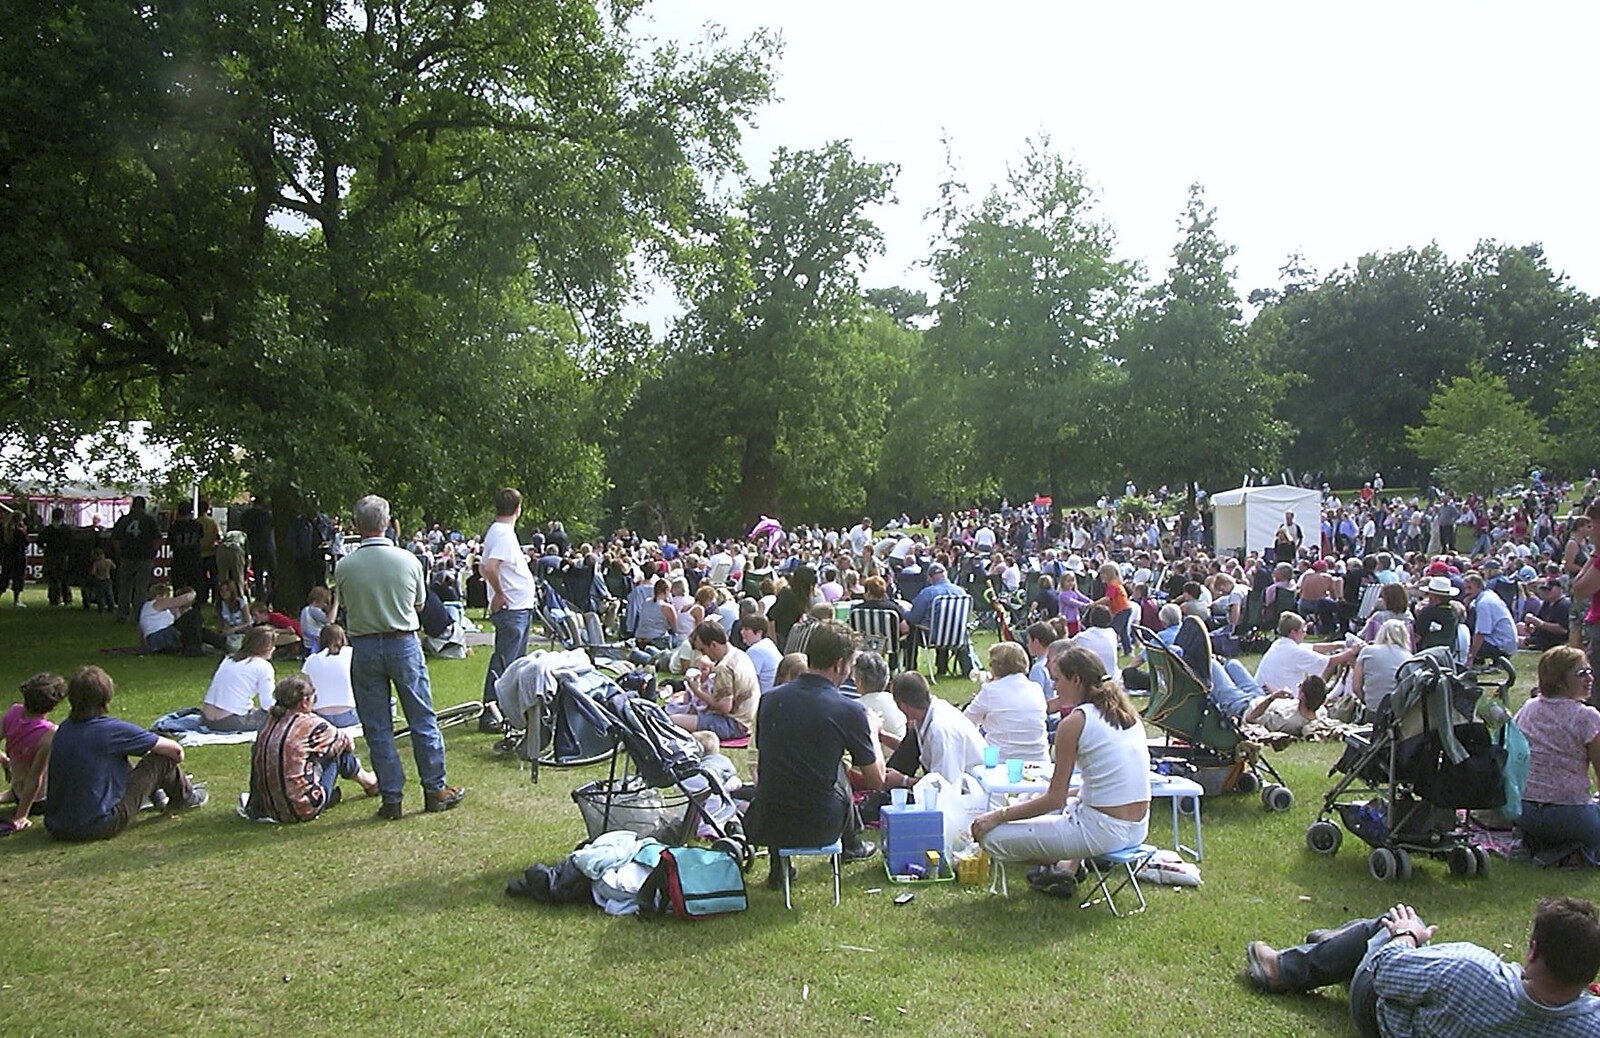 Crowds in Christchurch Park from Ipswich Music Day and the BSCC in Cotton, Suffolk - 6th July 2003